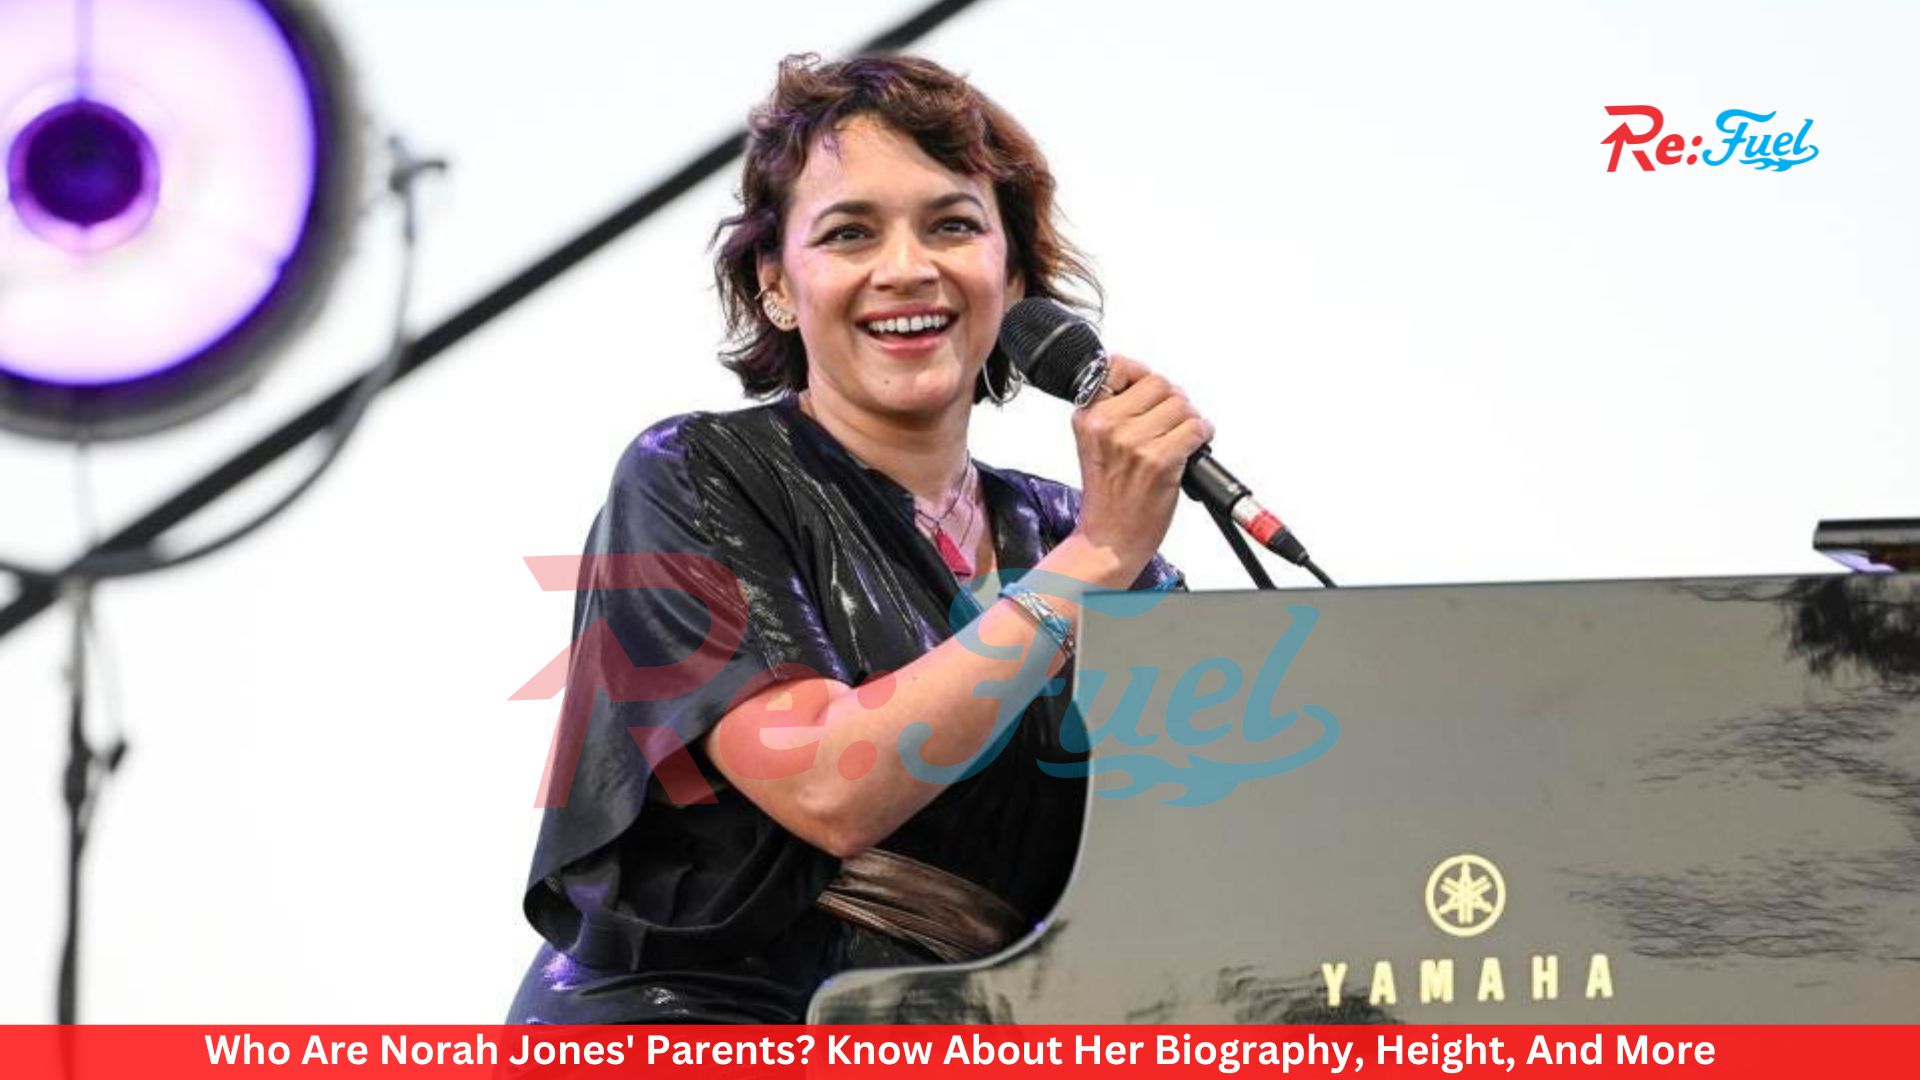 Who Are Norah Jones' Parents? Know About Her Biography, Height, And More